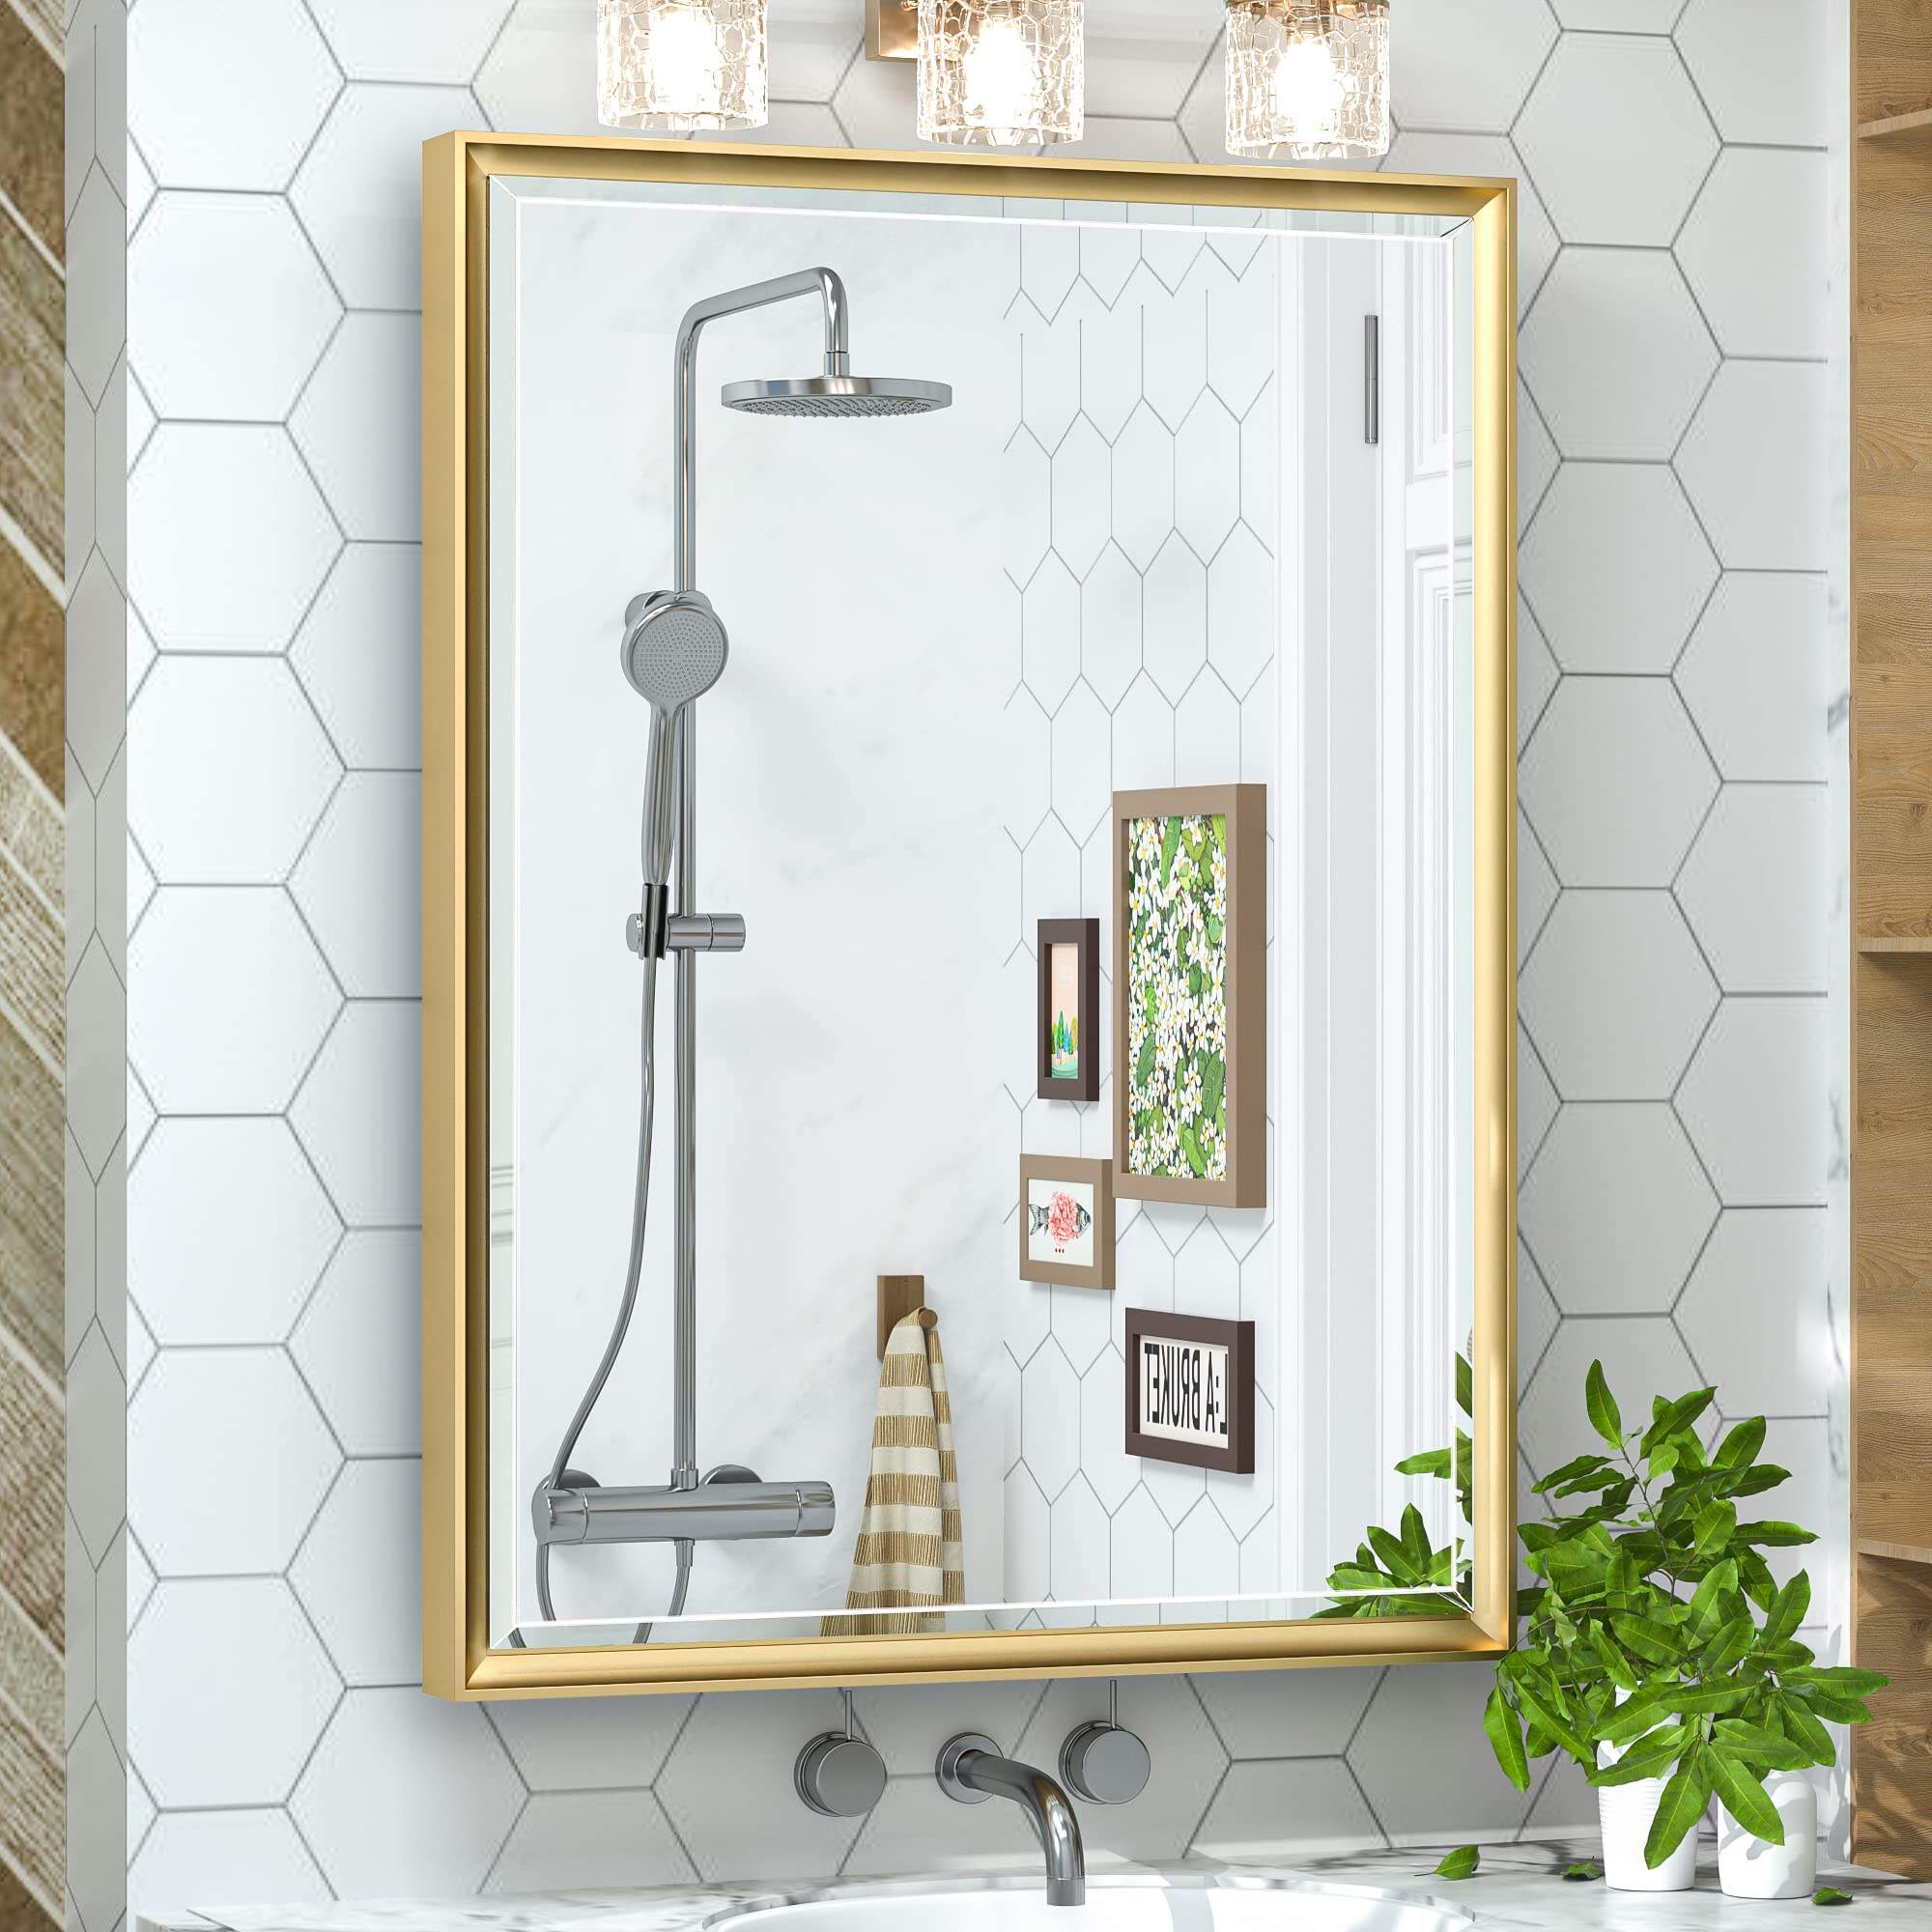 Foshan Haohan Smart Home Co., Ltd.  20x26 Recessed Medicine Cabinet Bathroom Vanity Mirror Gold Metal Framed Surface Wall Mounted with Aluminum Alloy Beveled Edges Design 1 Door for Modern Farmhouse